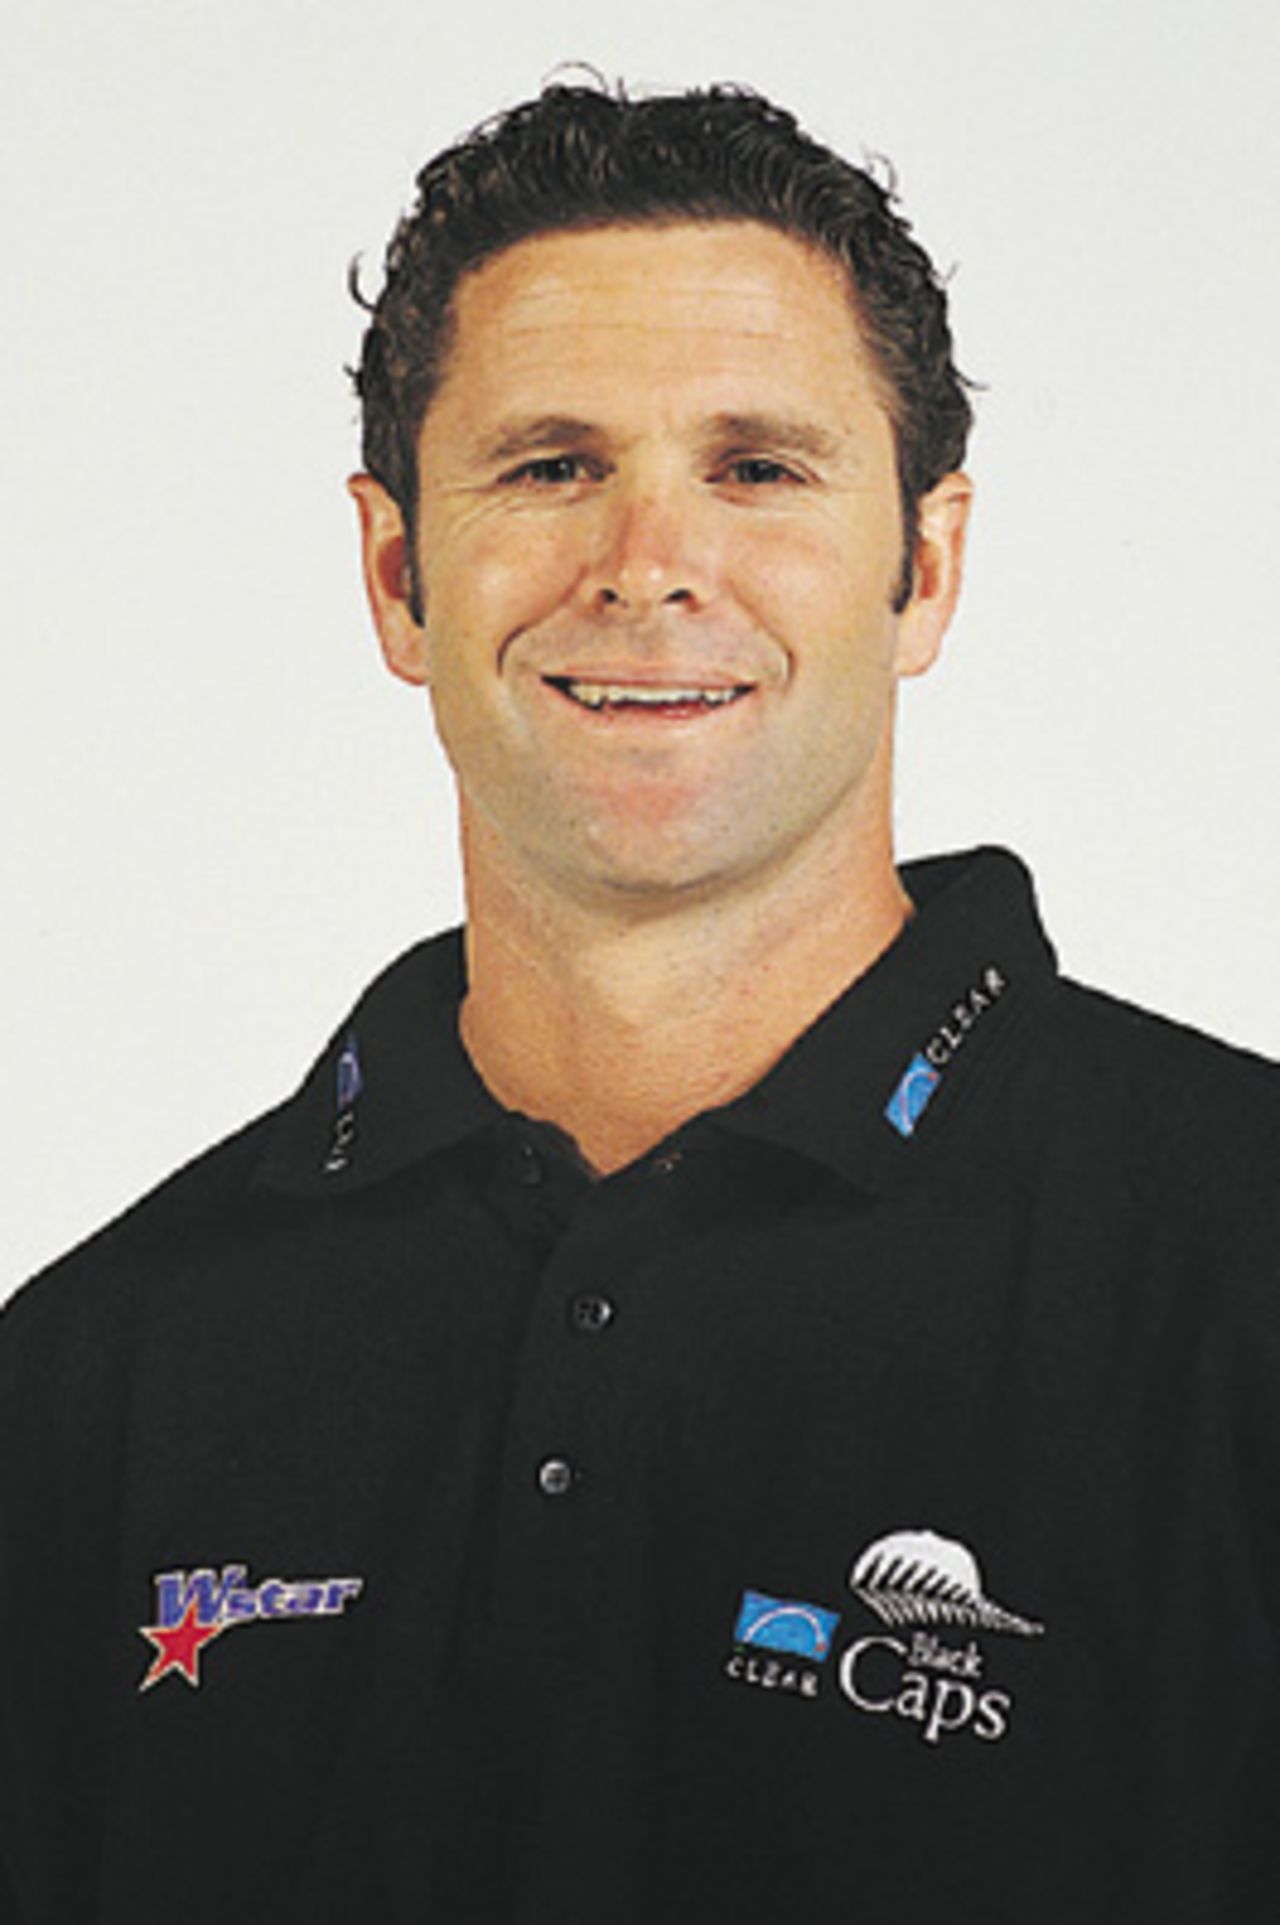 Portrait of Chris Cairns - New Zealand player in the 2000/01 season